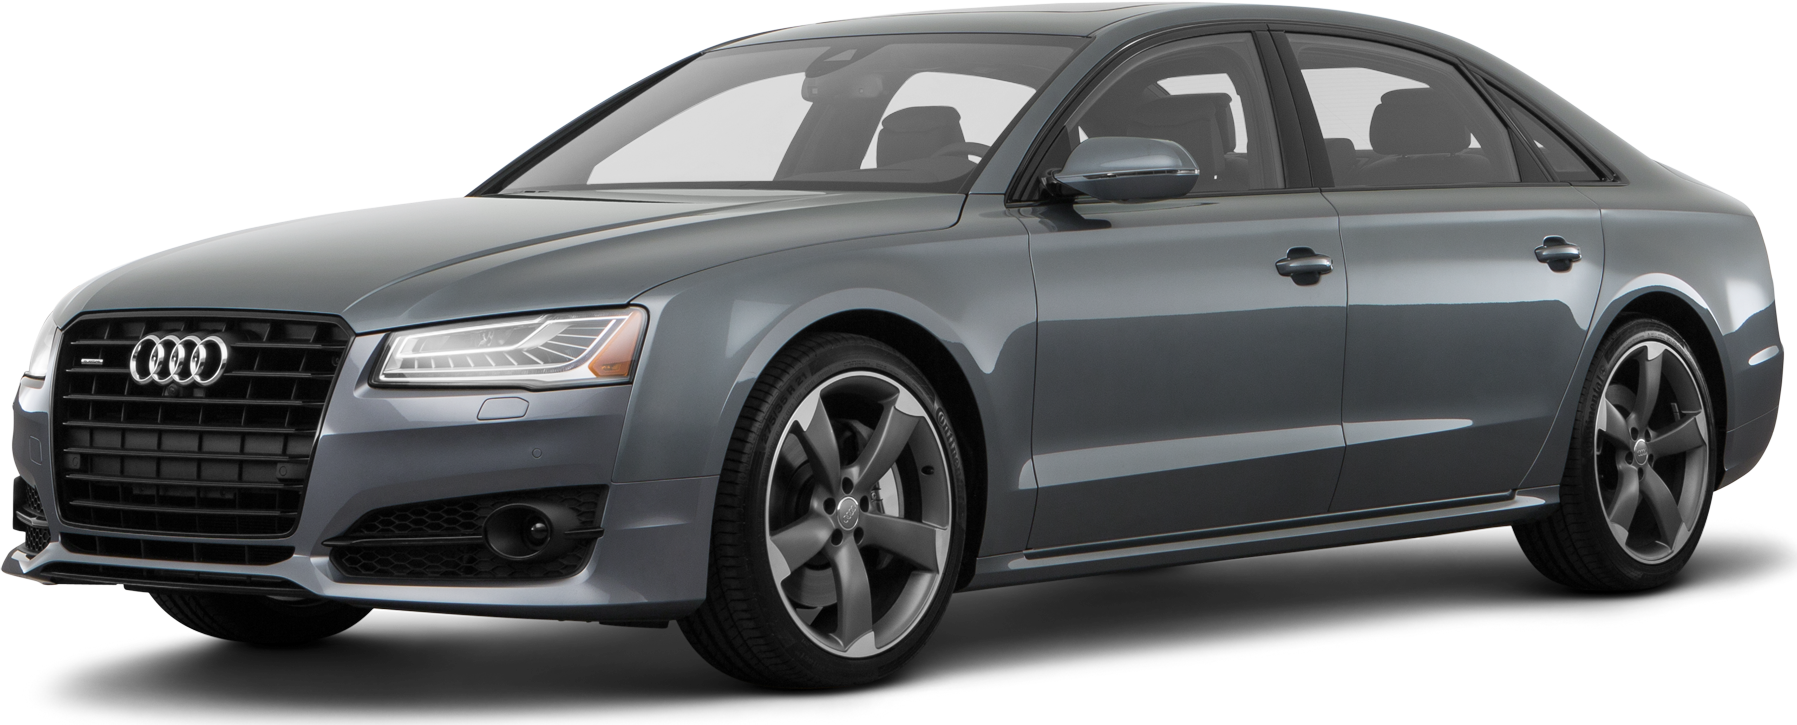 17 Audi A8 Values Cars For Sale Kelley Blue Book